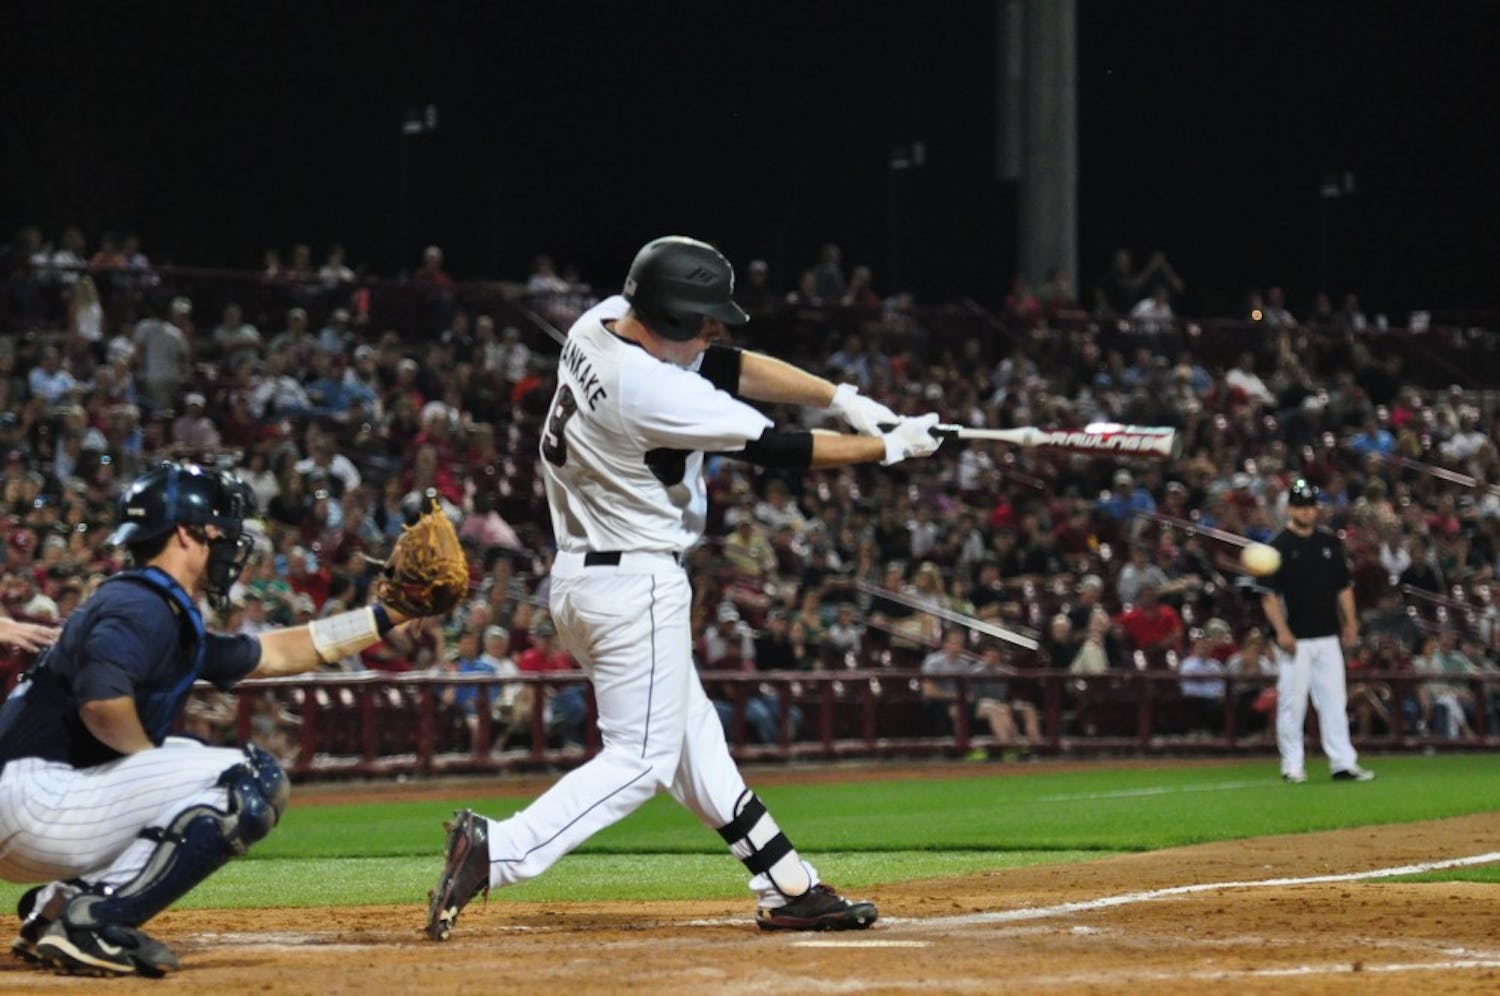 	Sophomore shortstop Joey Pankake hit a home run in the bottom of the ninth inning to give the Gamecocks a 6-5 win over The Citadel at Carolina Stadium Tuesday night.